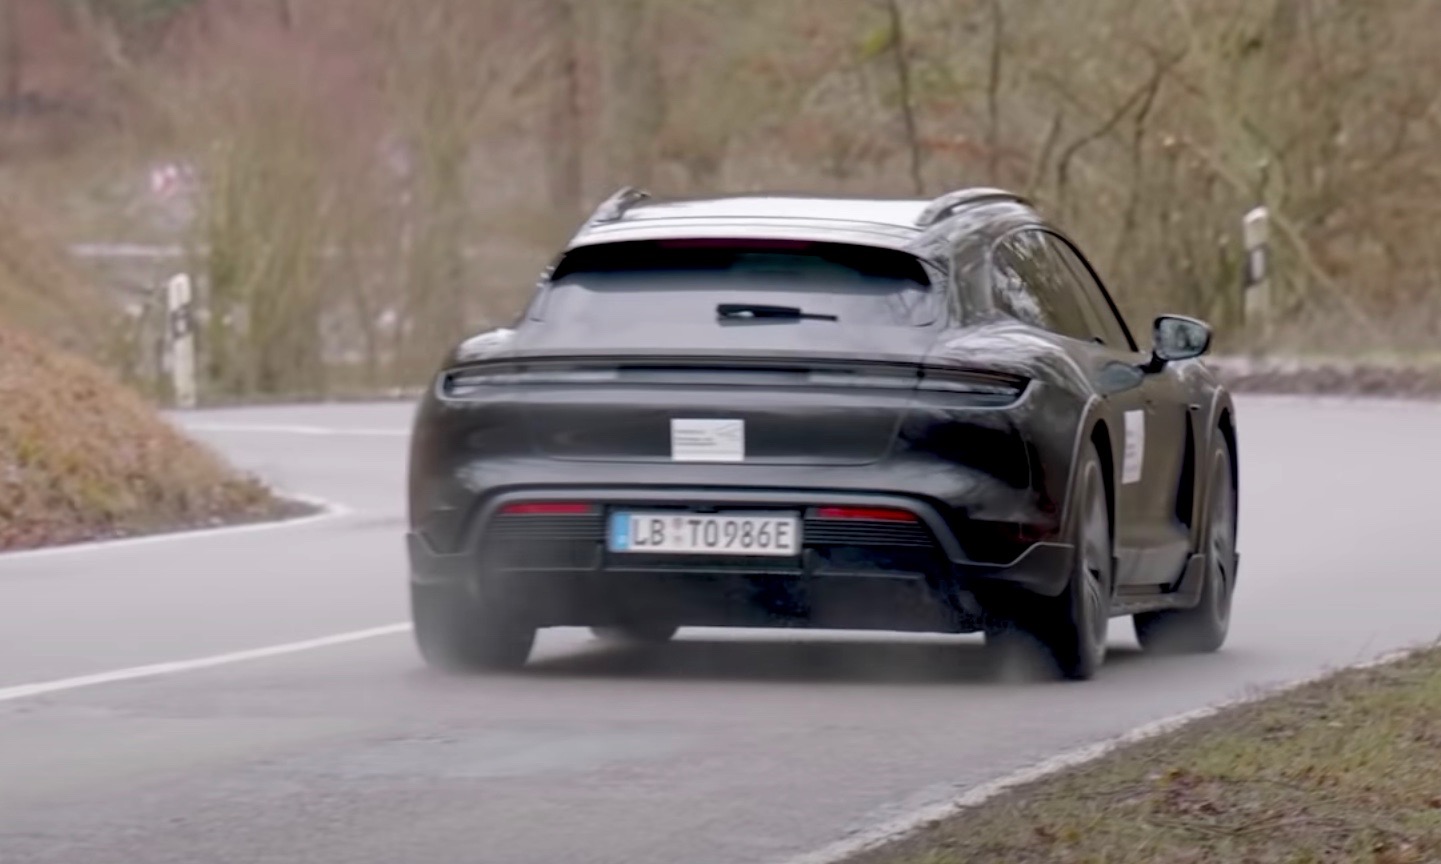 Porsche Taycan Cross Turismo previewed, perfect EV all-rounder? (video)